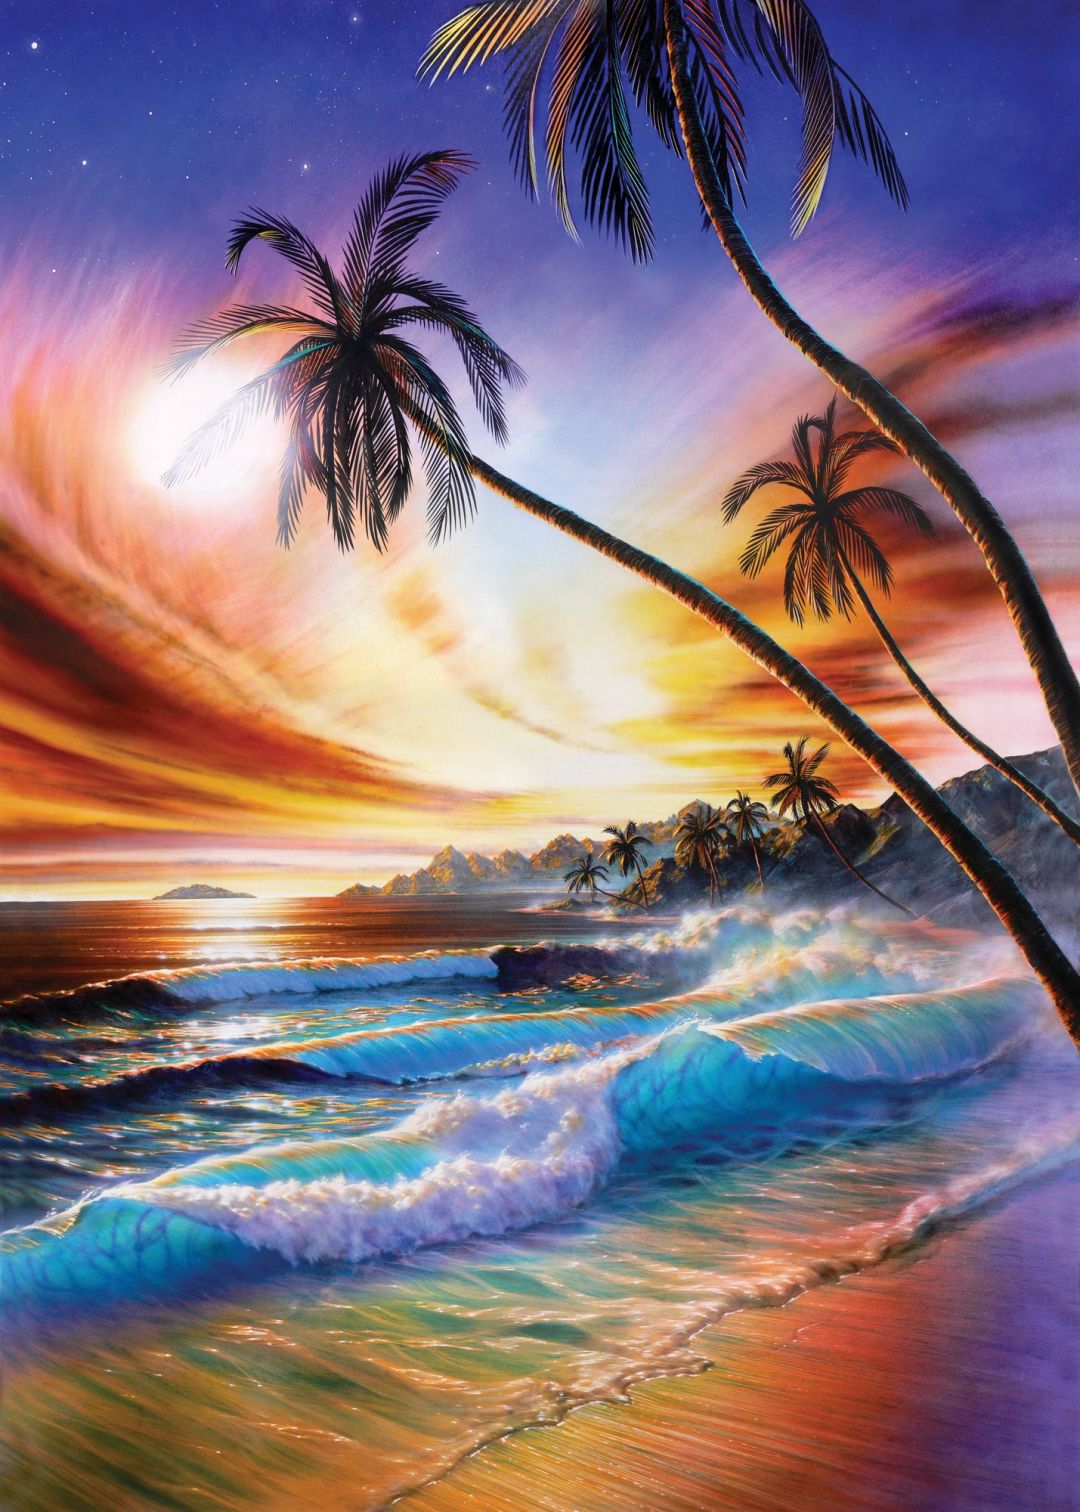 ✓[110+] Tropical Beach Wall Mural & Tropical Beach Wallpaper - Android /  iPhone HD Wallpaper Background Download (png / jpg) (2023)